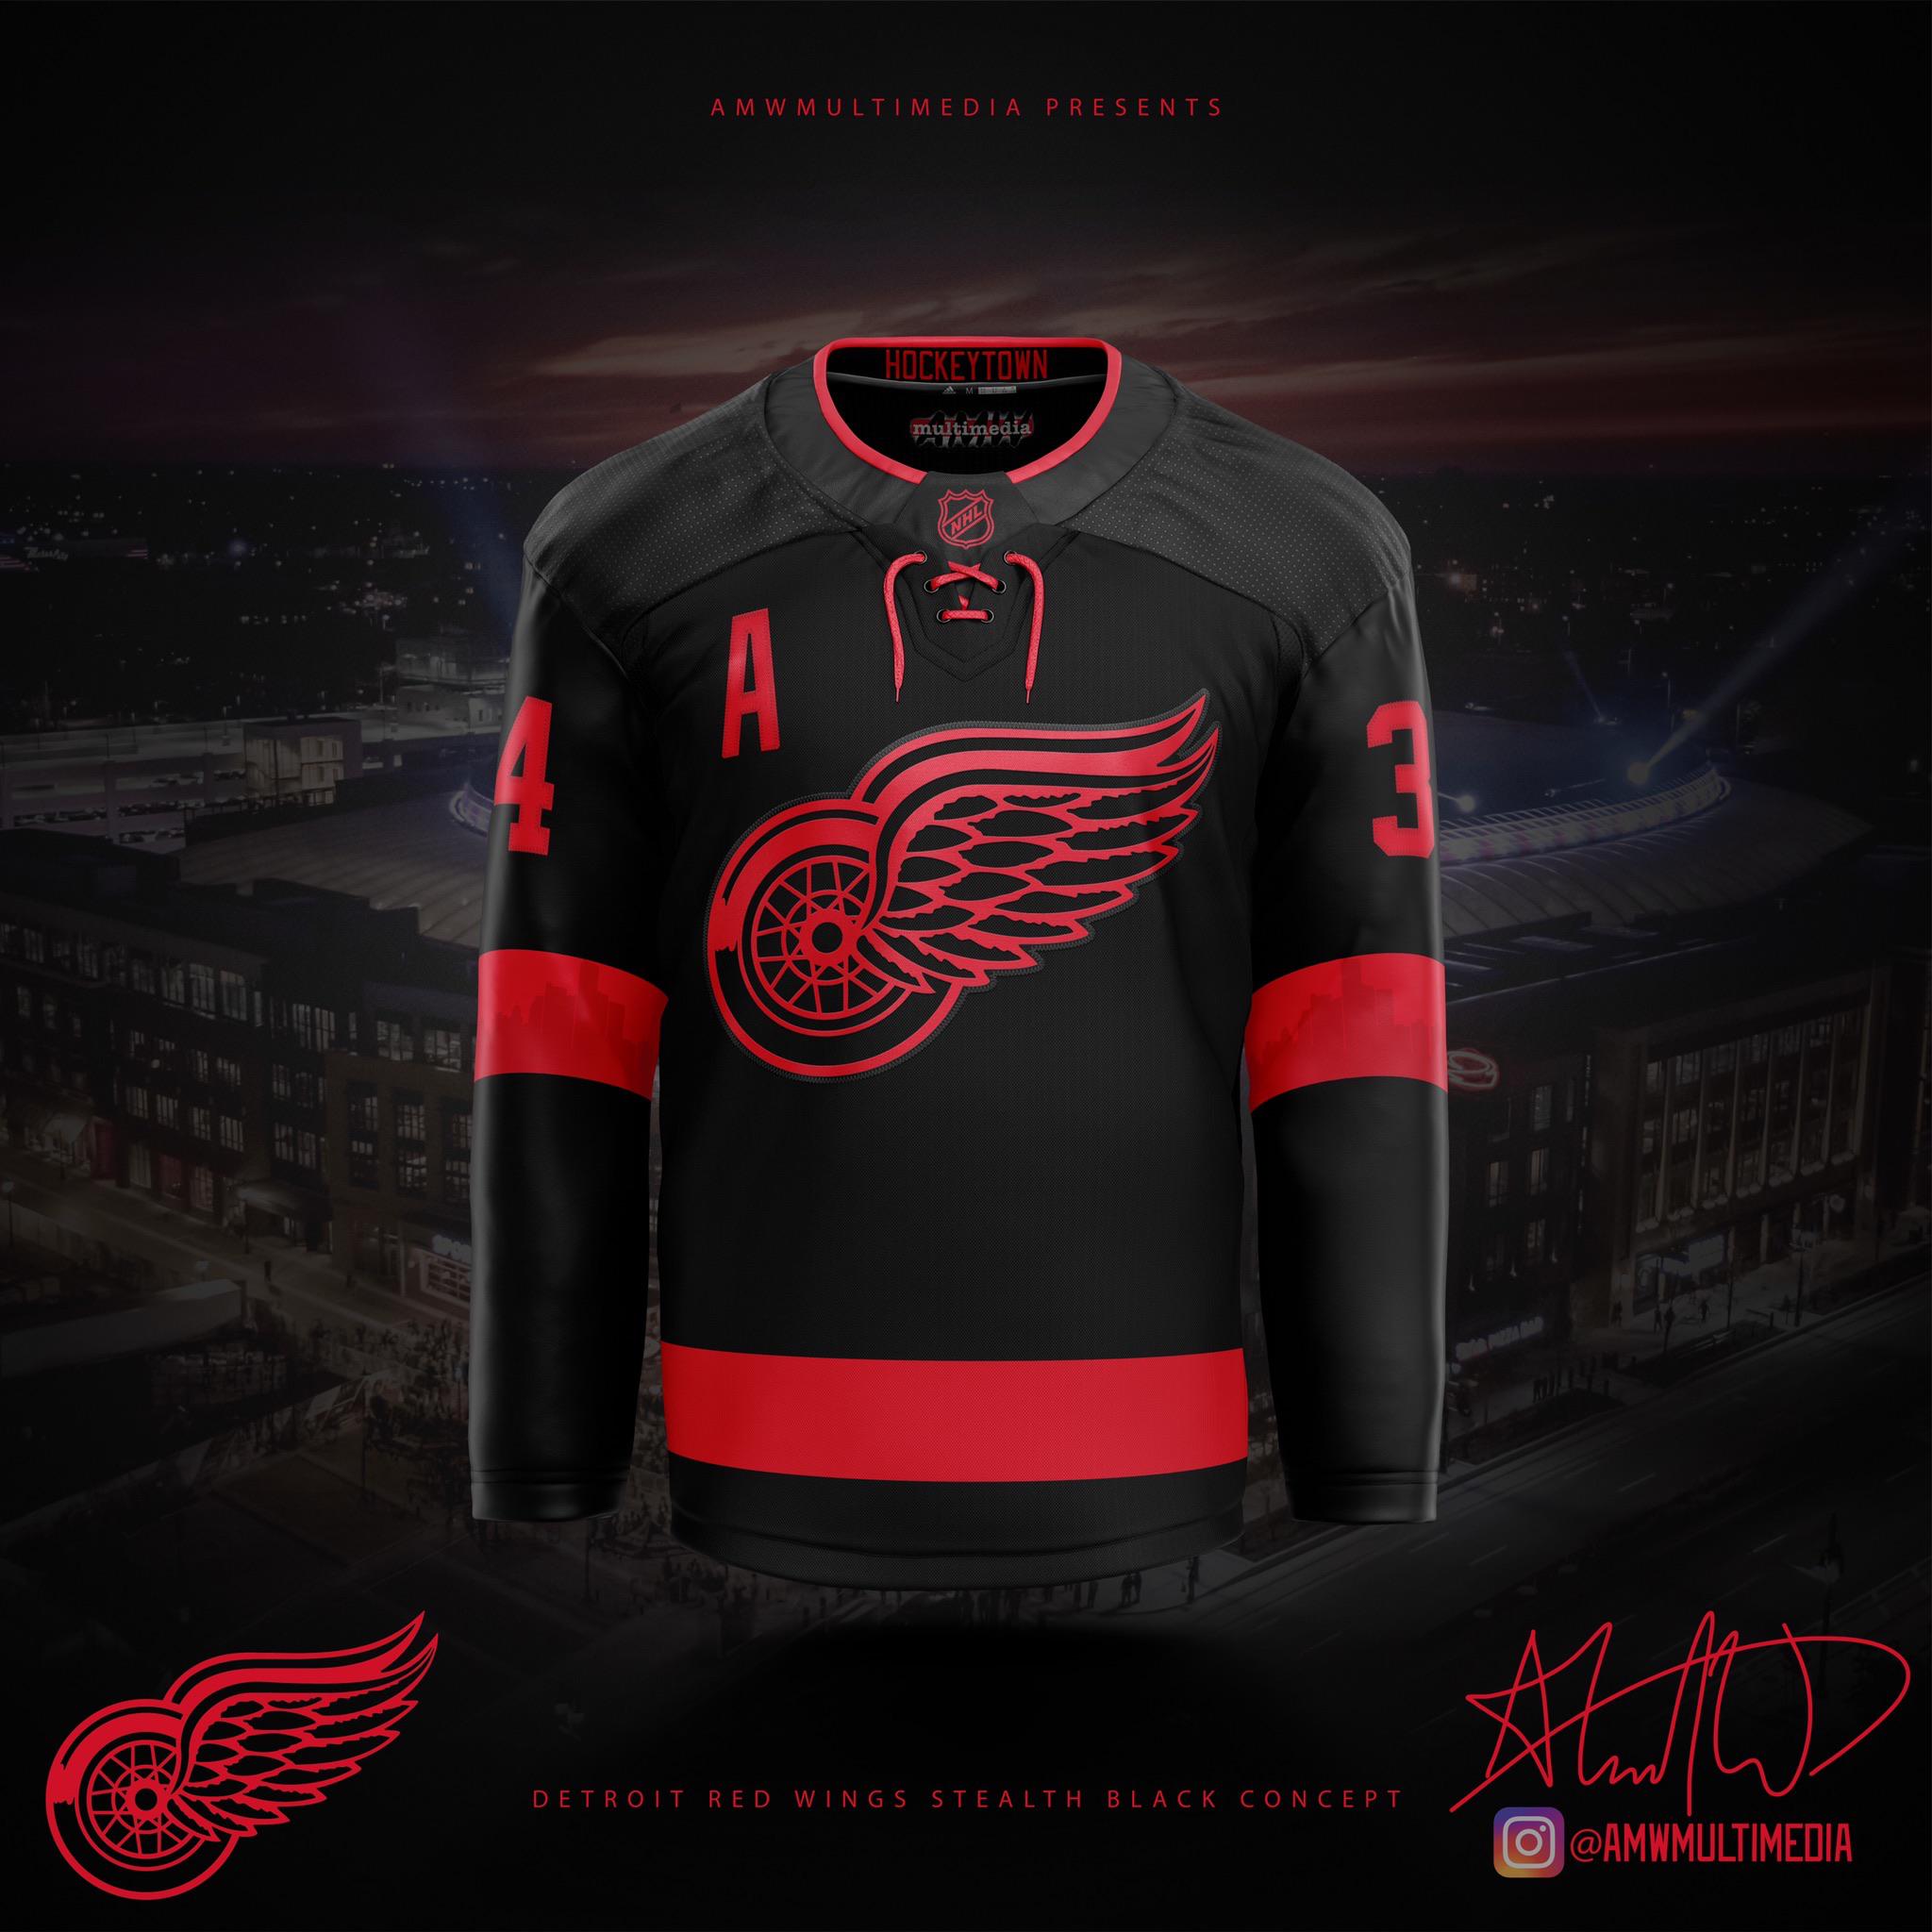 Detroit Red Wings jerseys getting shakeup with first black stripes